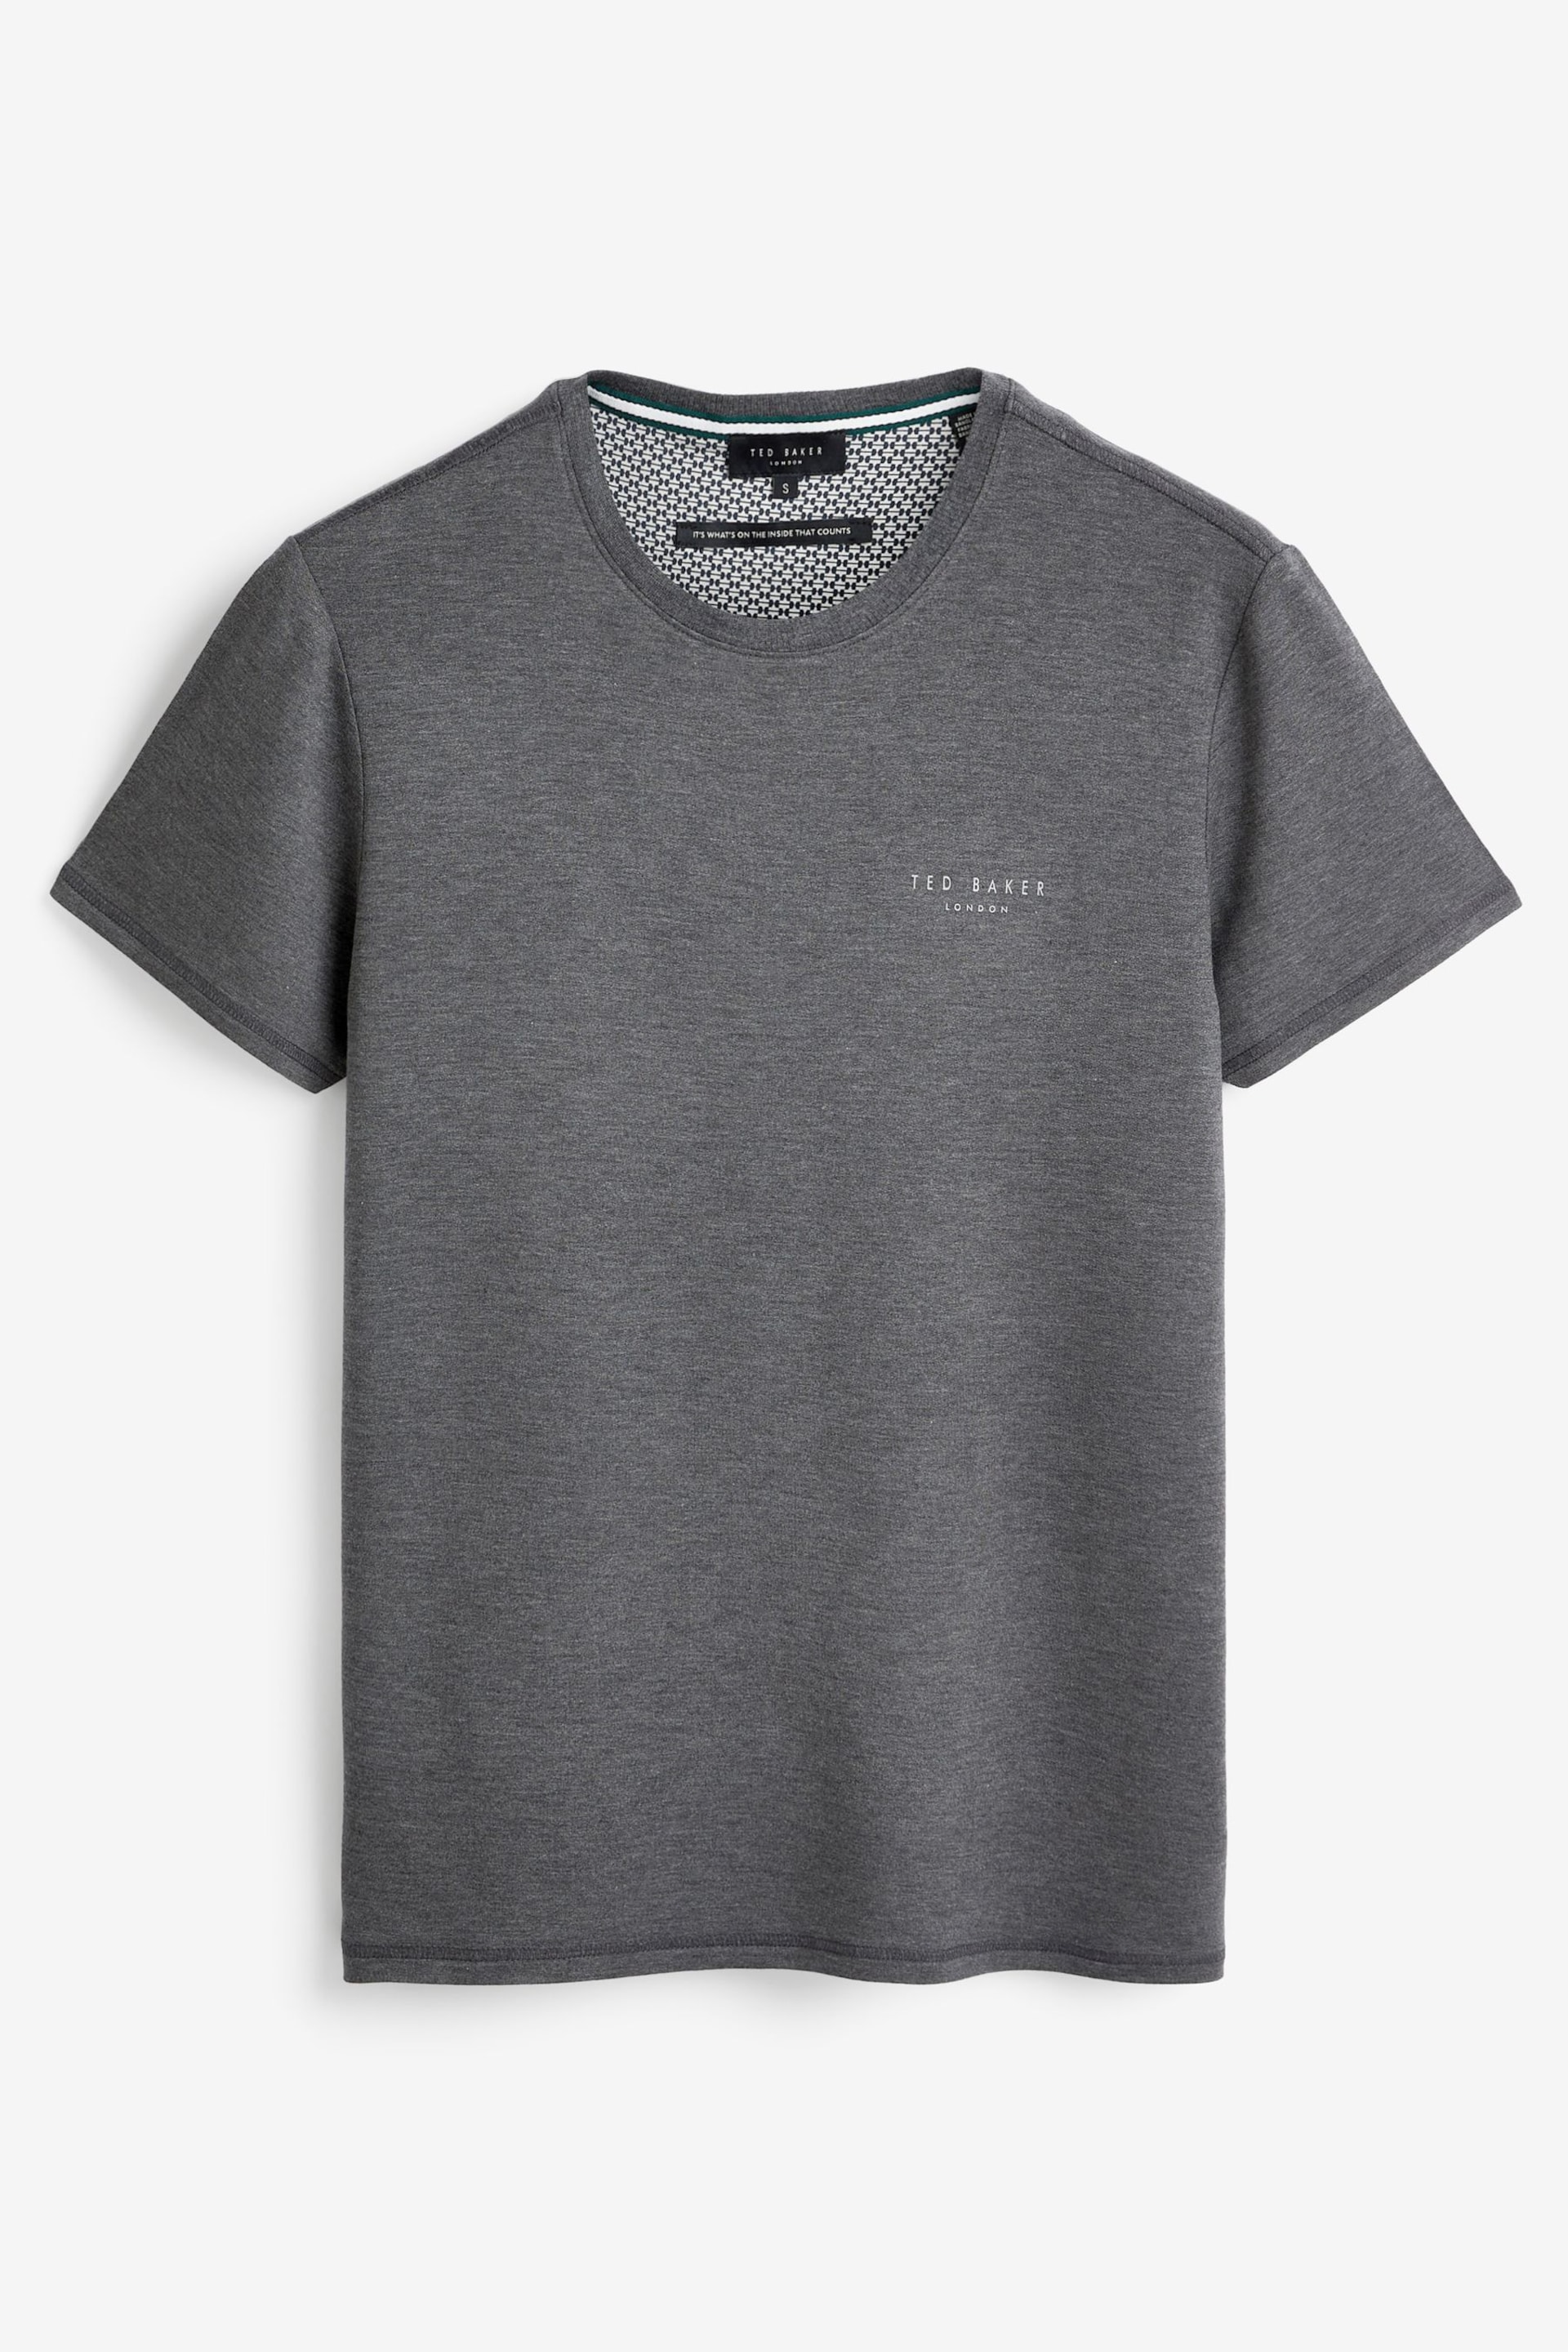 Ted Baker Grey T-Shirt - Image 3 of 3